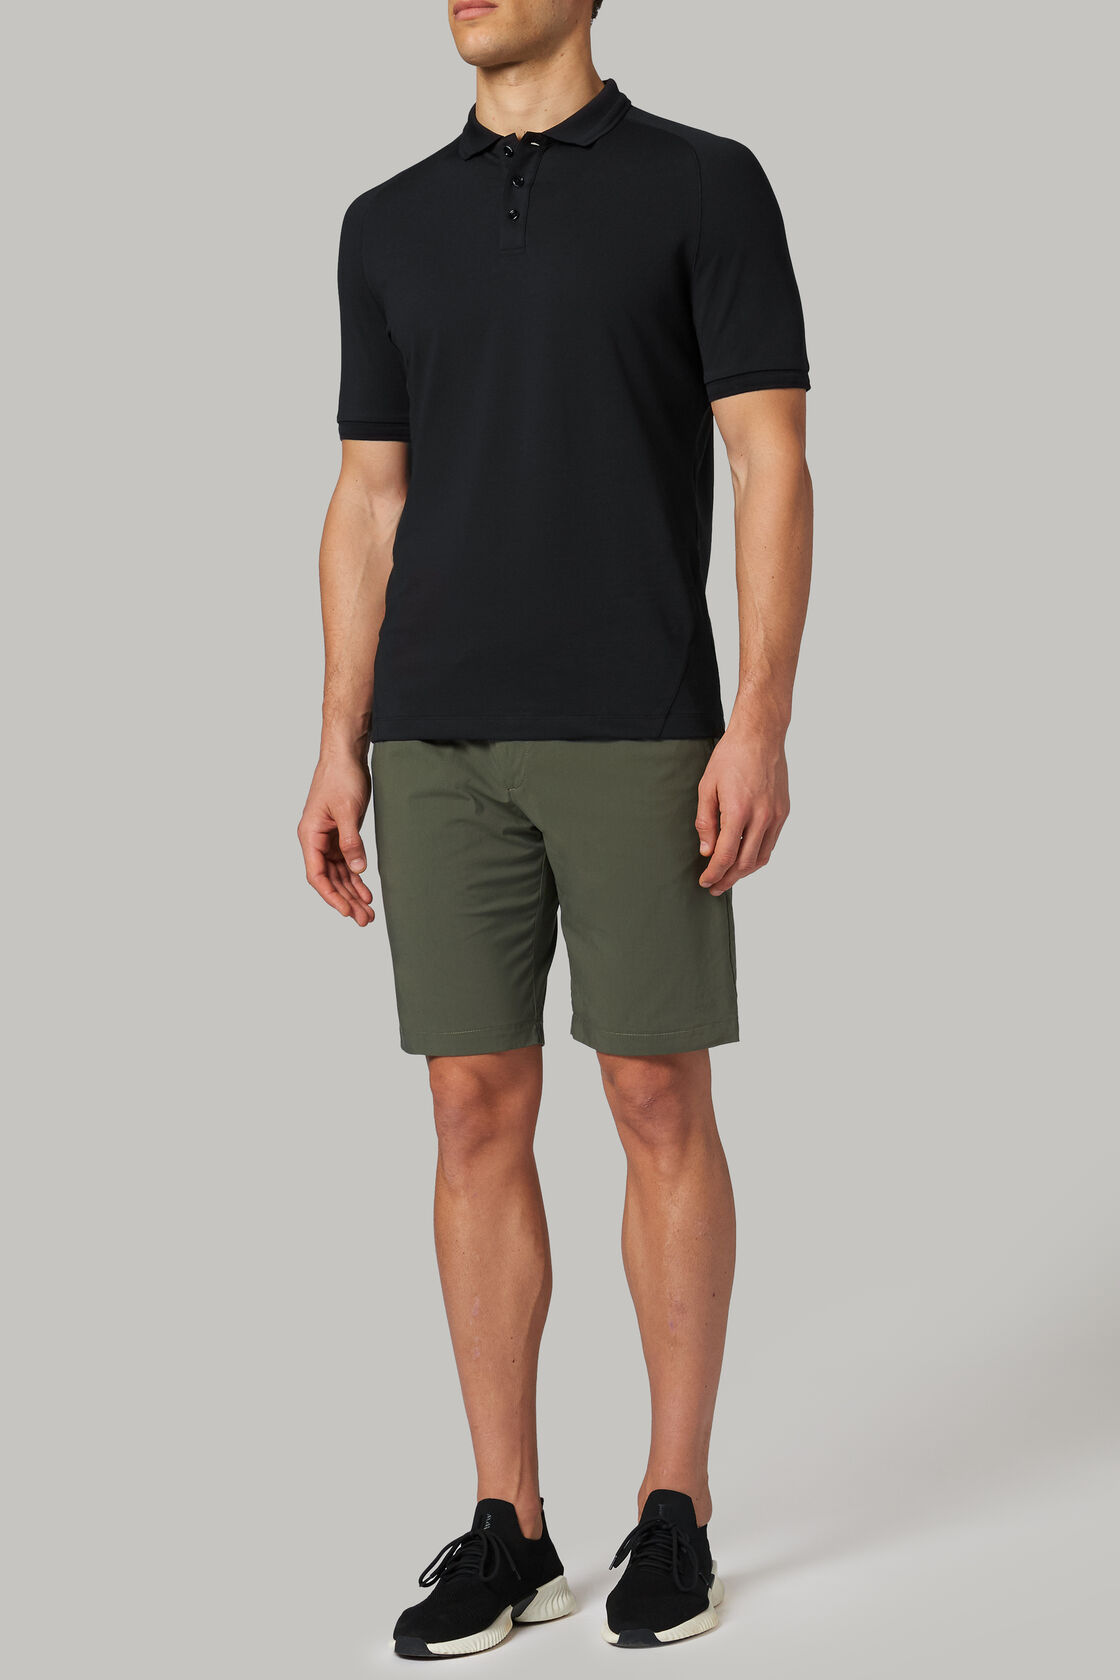 Polo shirt in sustainable performance pique, , hi-res